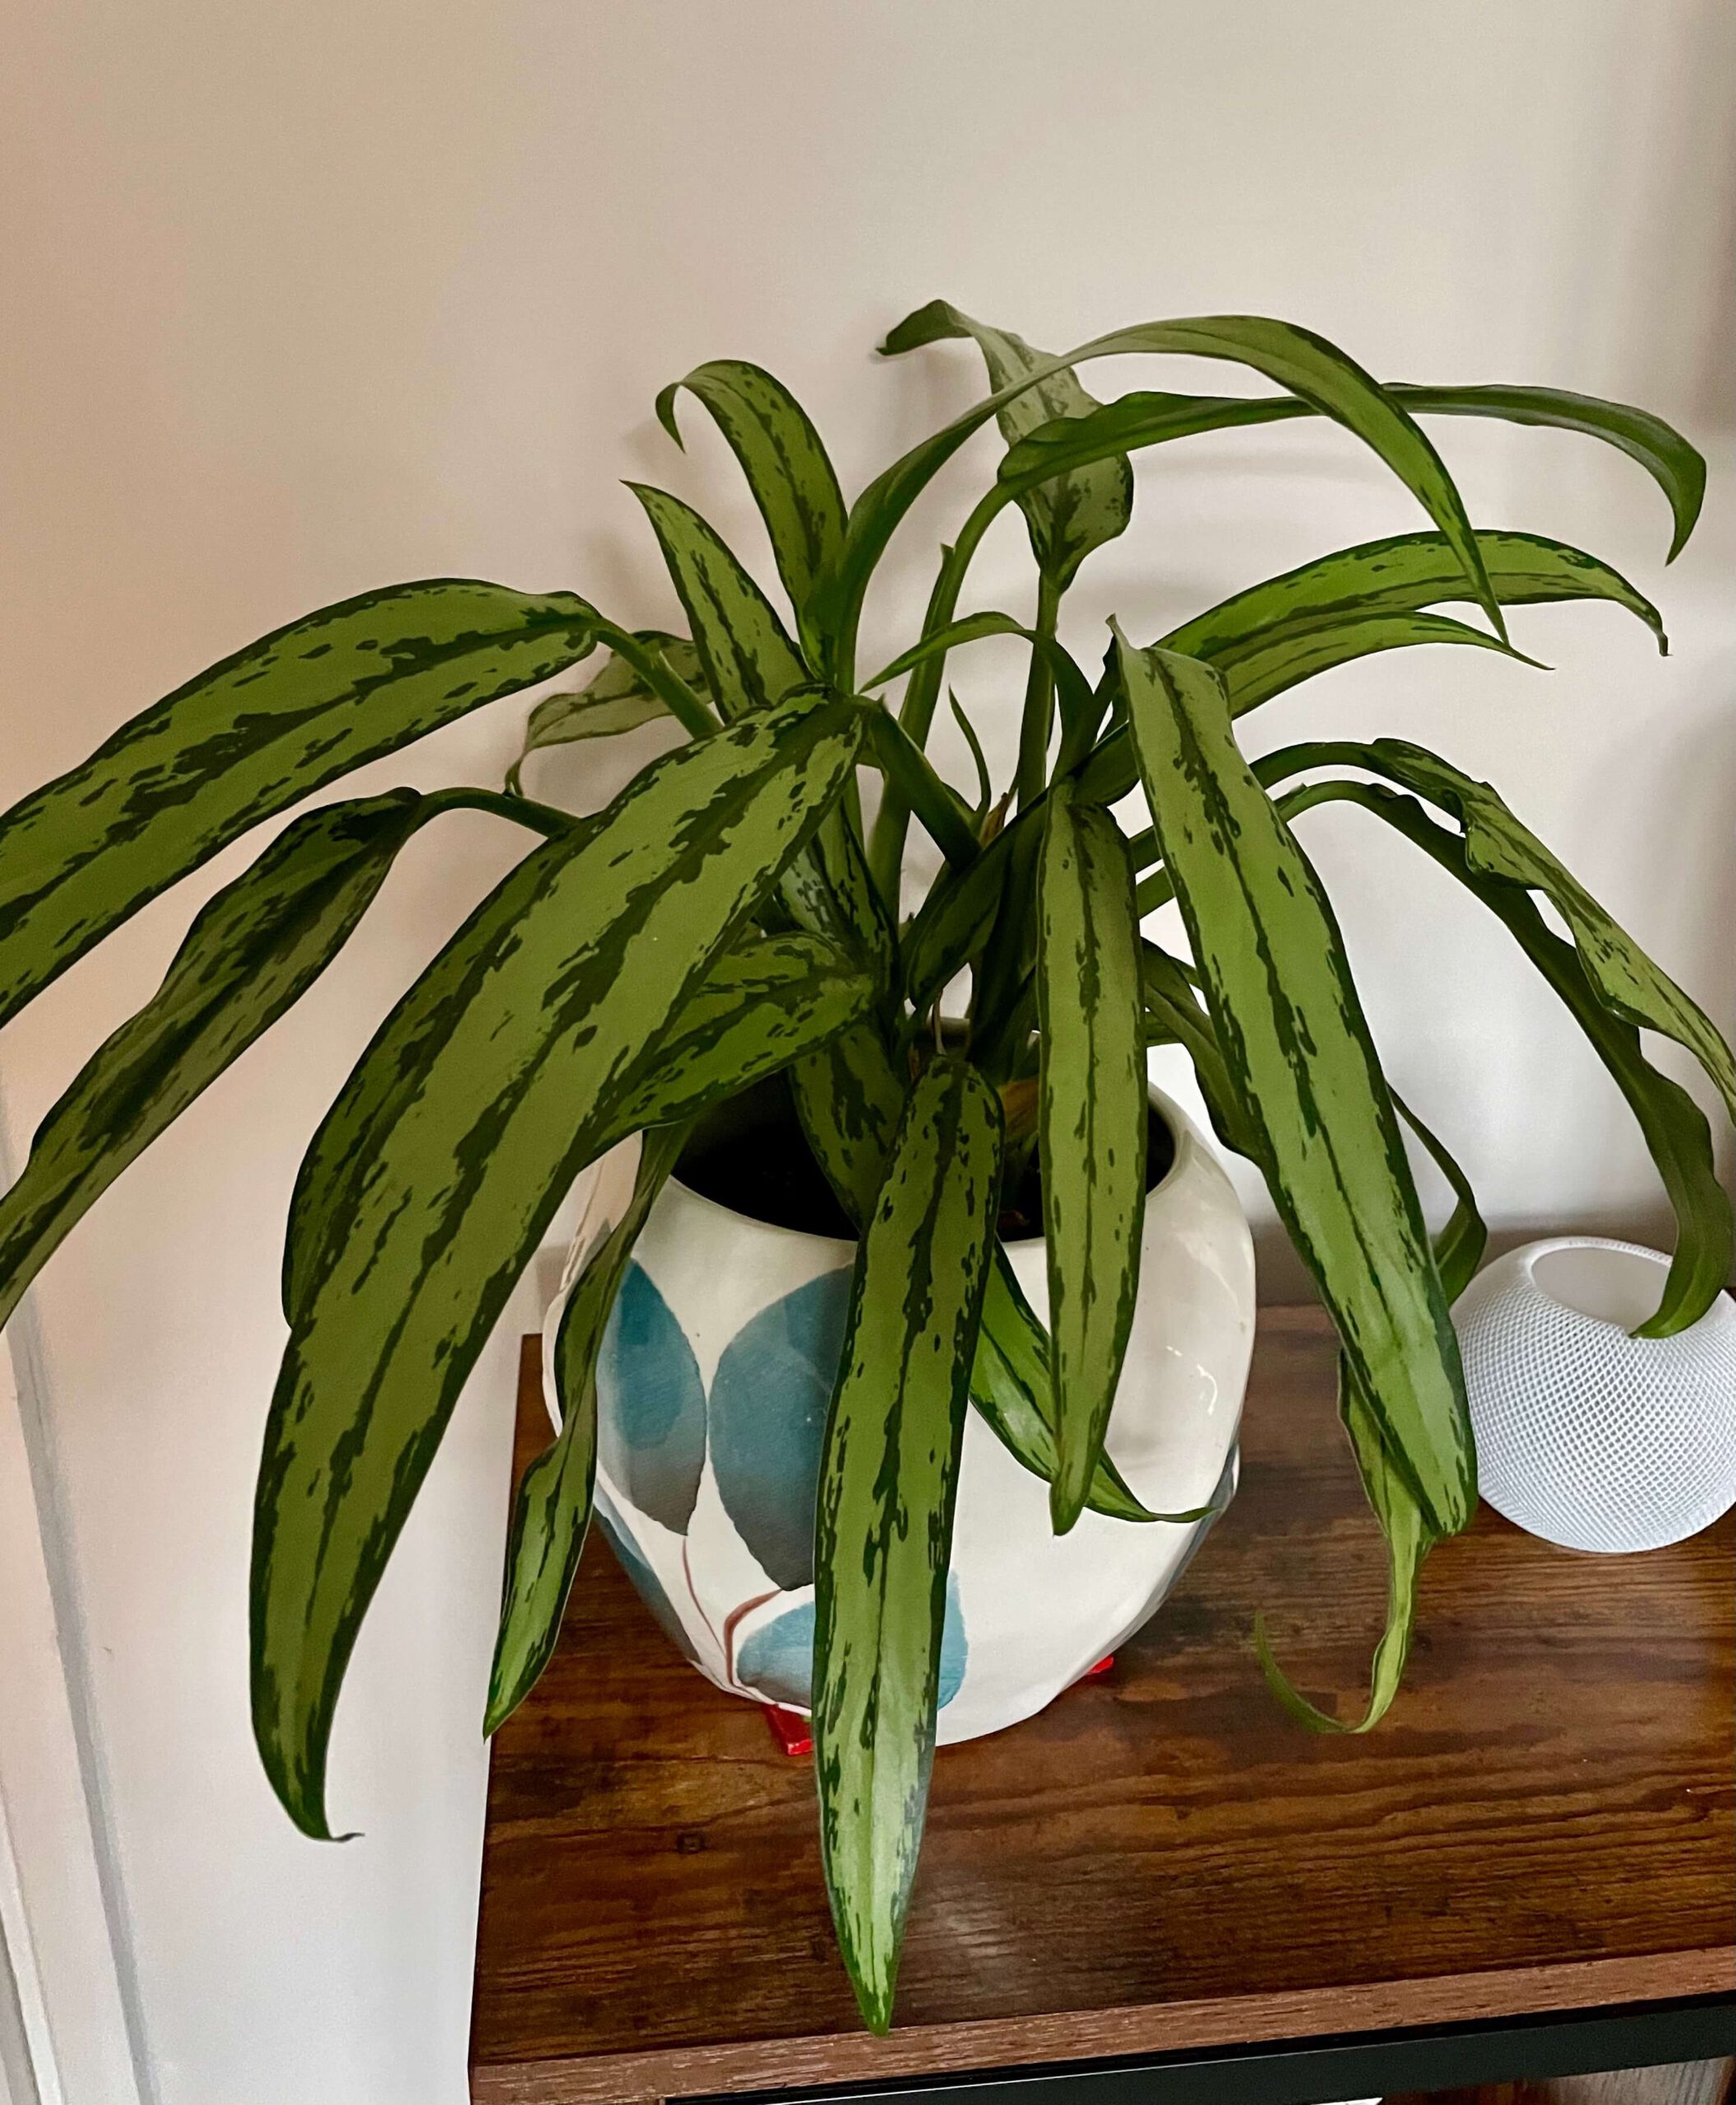 Chinese evergreen houseplant on a wooden sideboard